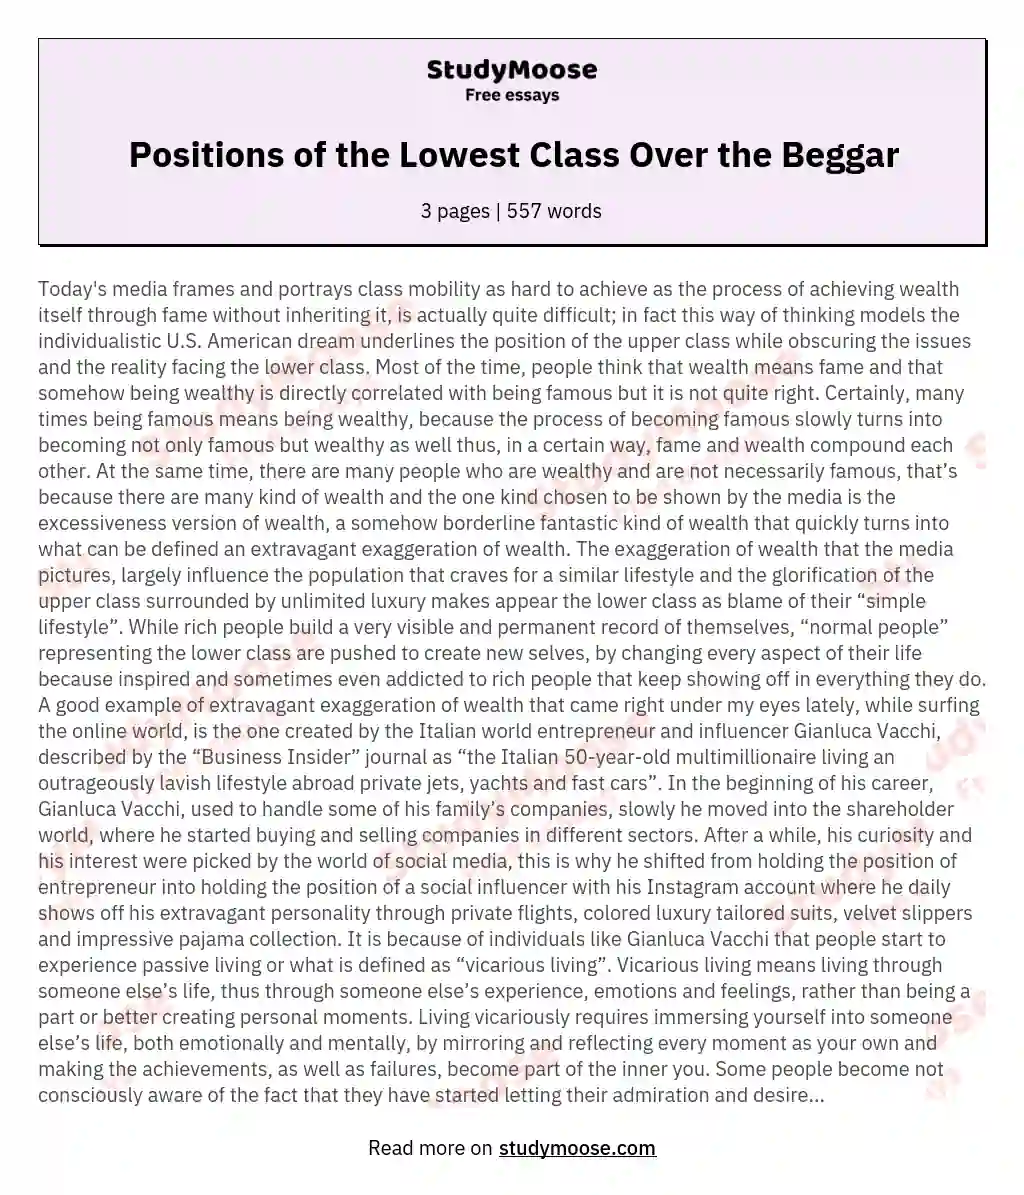 Positions of the Lowest Class Over the Beggar essay